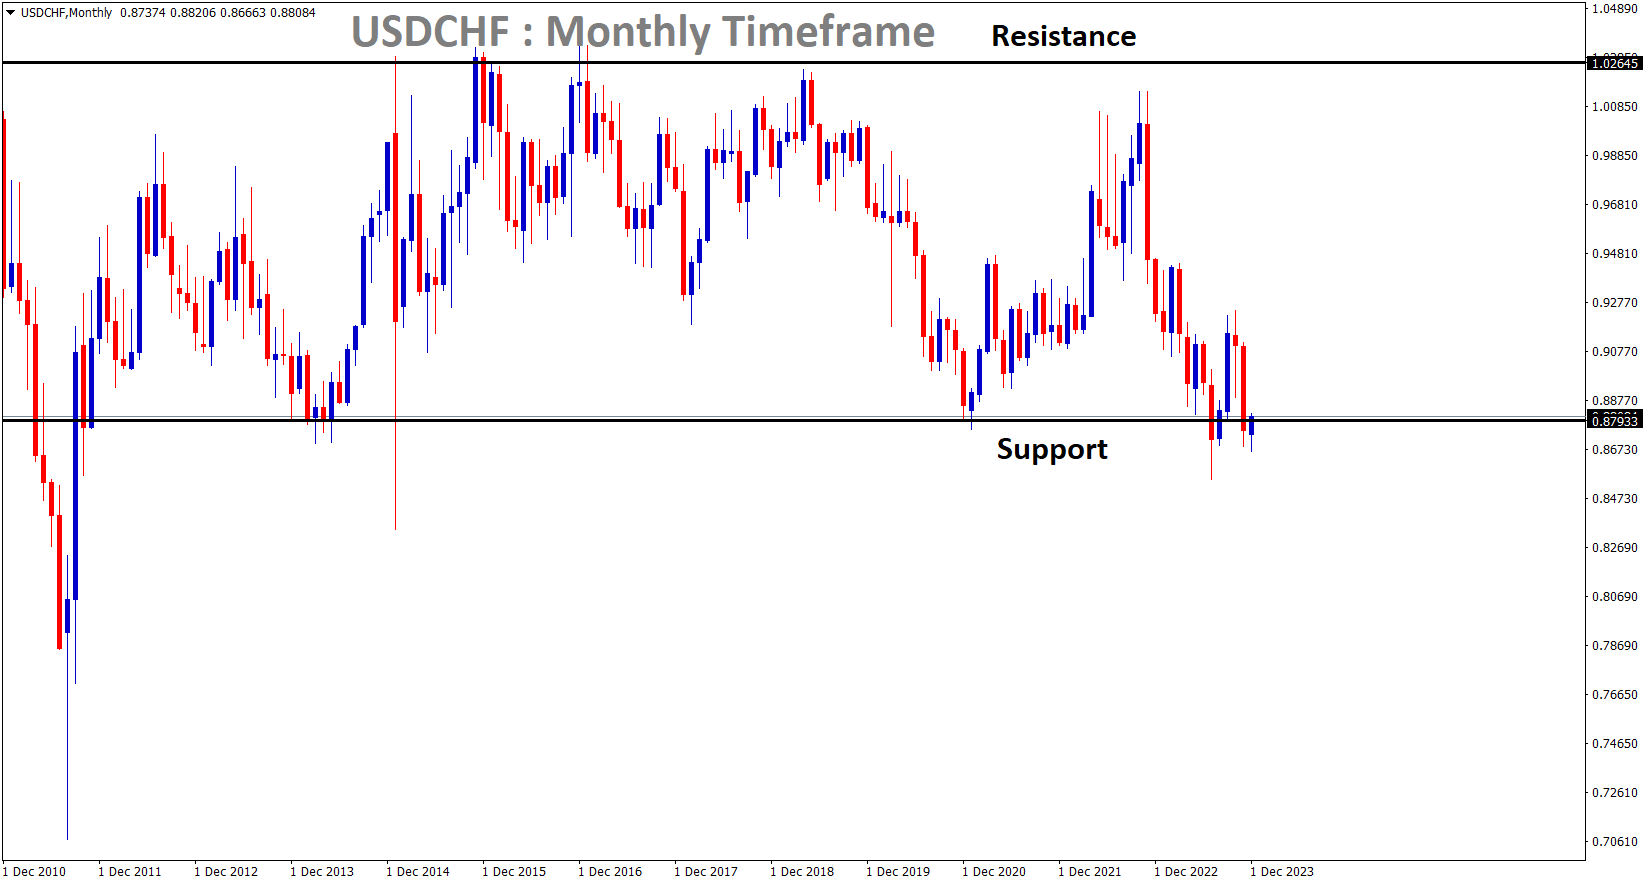 USDCHF is moving in a box patttern and the market has reached the support area of the pattern